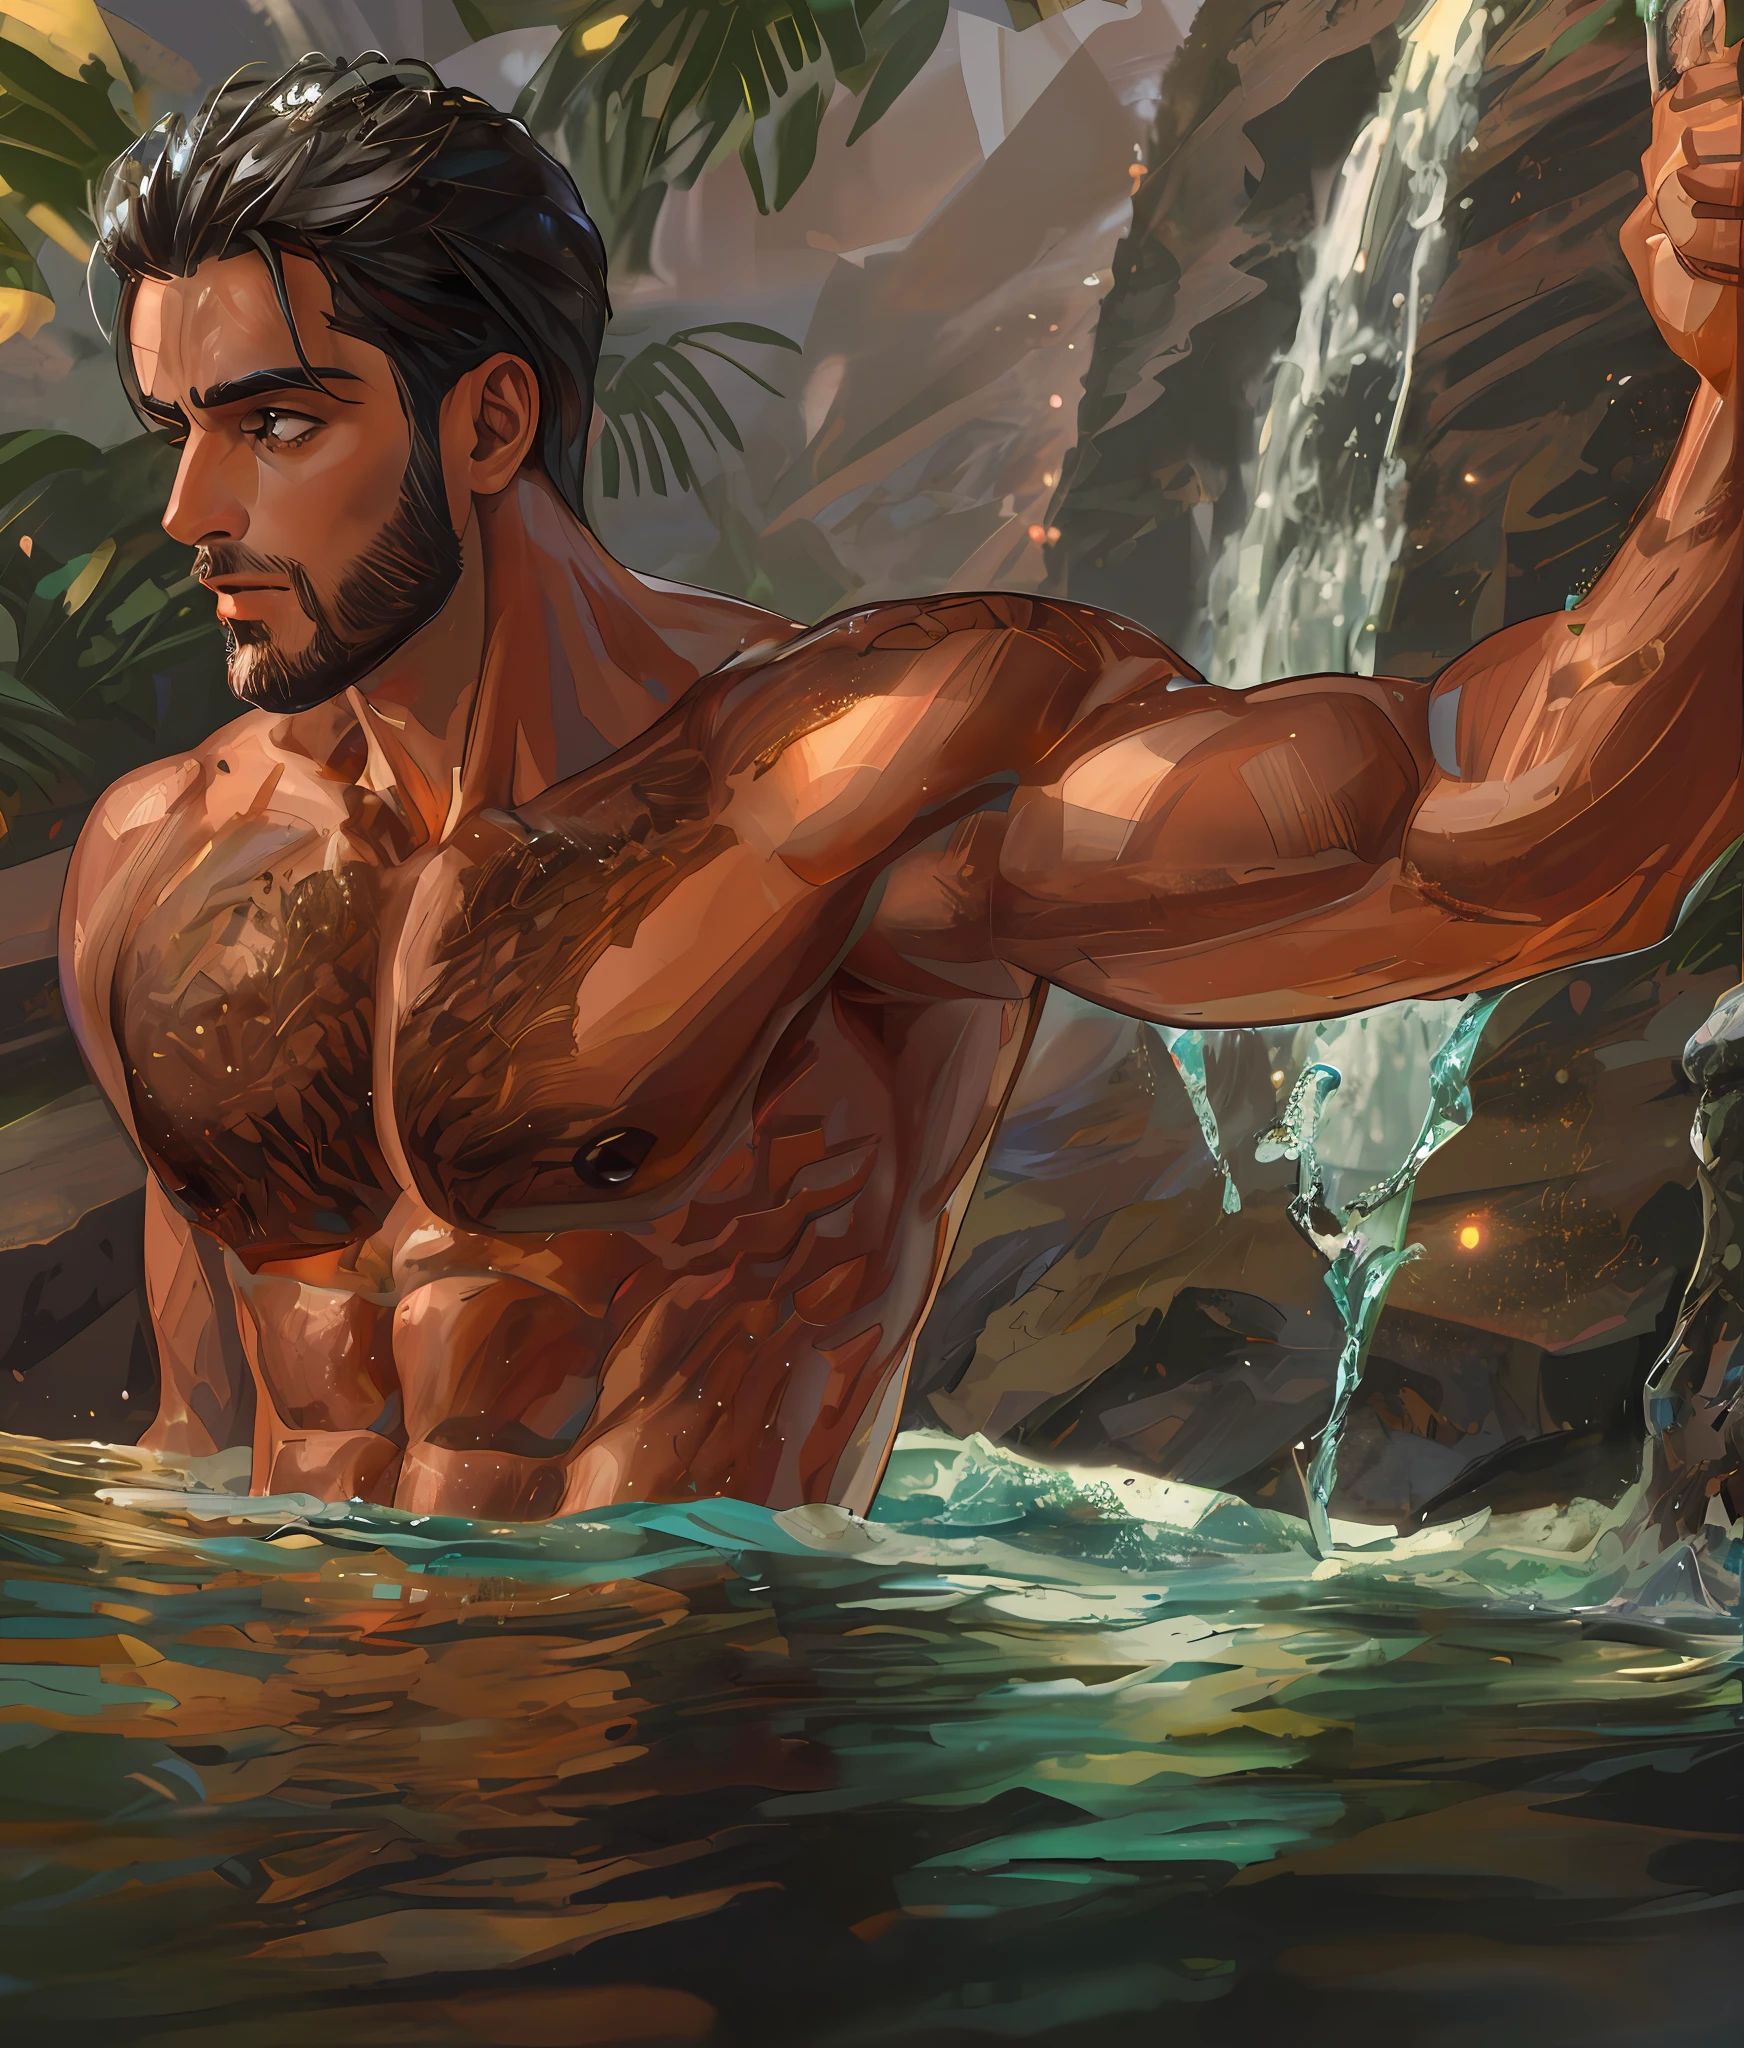 there is a man that is standing in the water with a waterfall, strong masculine features, modelo masculino, macho atraente, 2 homens musculosos atraentes, corpos peludos molhados, corpo atraente, musculoso masculino, chiseled muscles, exaggerated muscle physique, Homem magro com pele bronzeada clara, corpo musculoso sexy, corpo bonito bonito, Directed by: Adam Dario Keel, Bowed muscles;